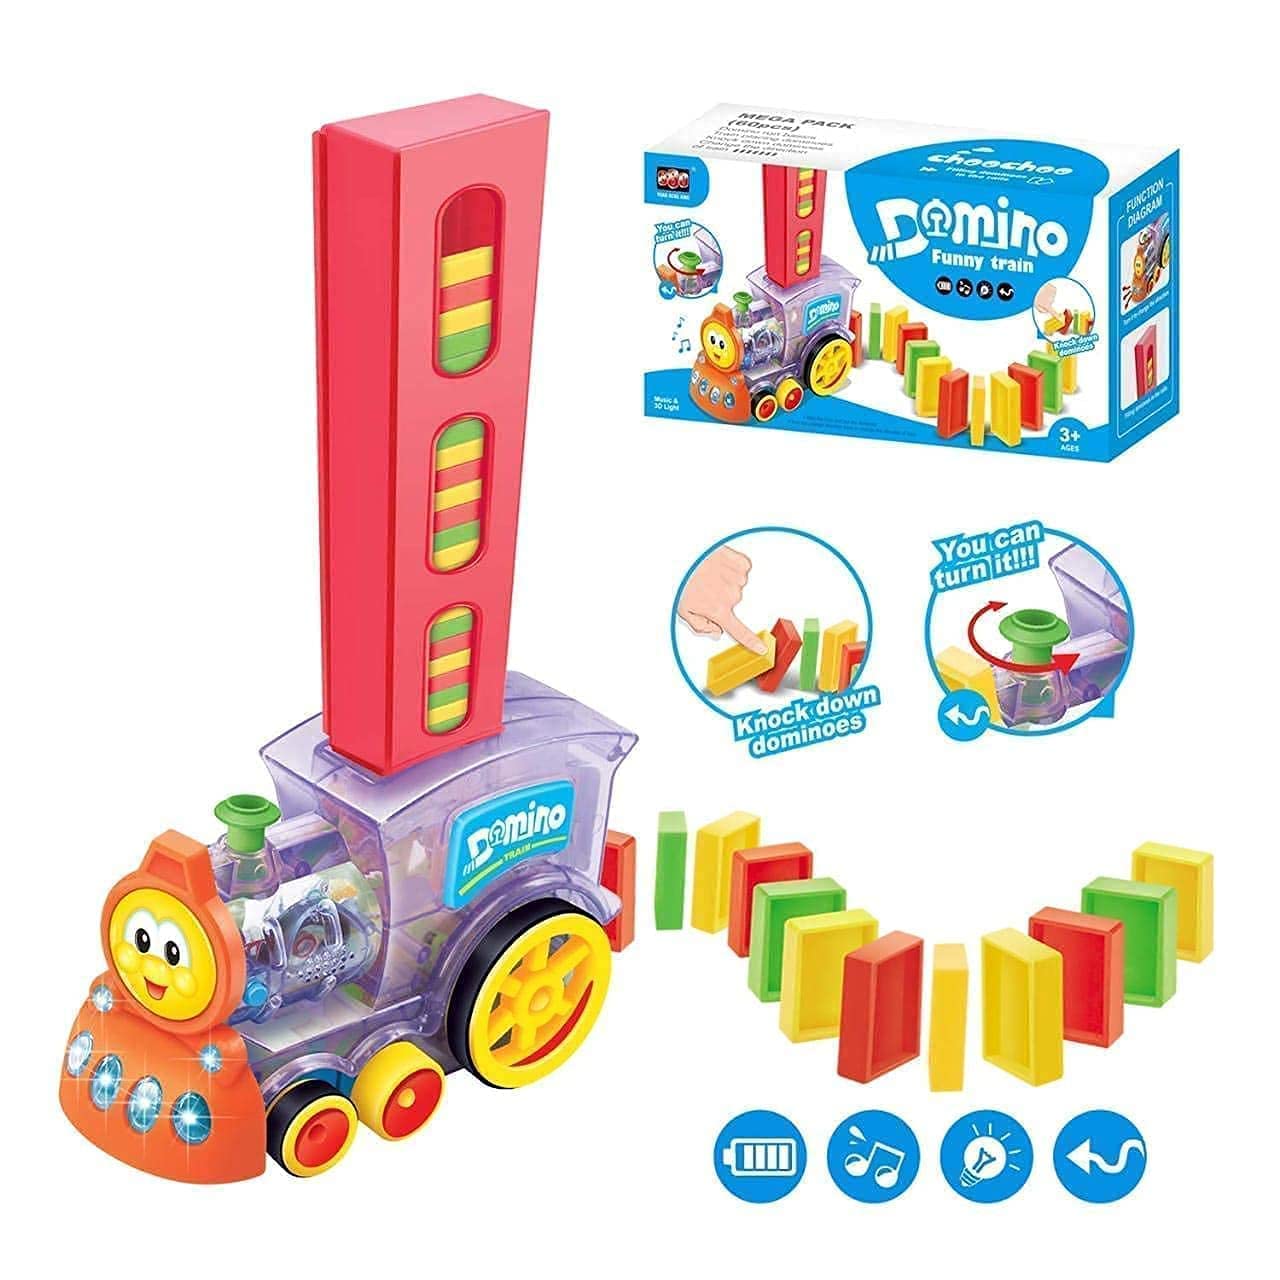 Braintastic Domino Train Set with 60 Pcs Premium Pack Dominoes with Light Sound Building Blocks Stacking Tile Game Toys for Kids